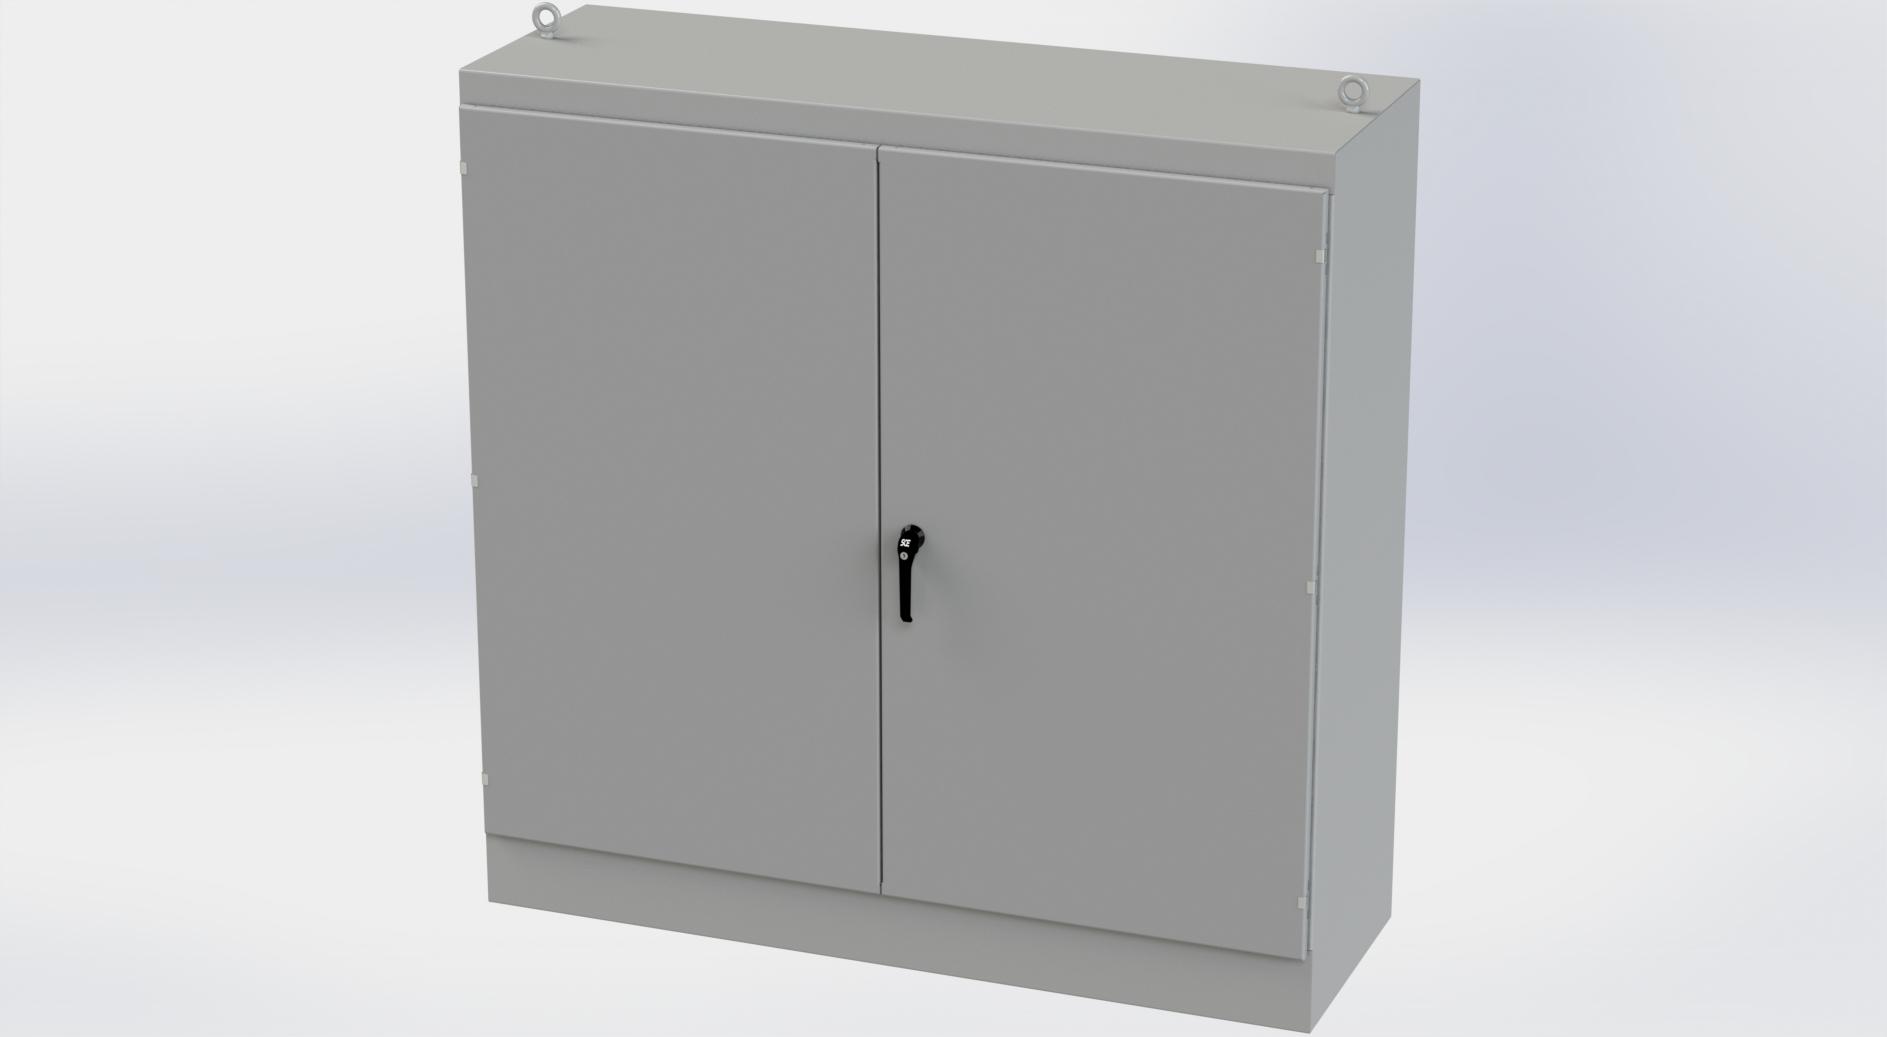 Saginaw Control SCE-727224FSD FSD Enclosure, Height:72.00", Width:72.00", Depth:24.00", ANSI-61 gray finish inside and out. Optional sub-panels are powder coated white.